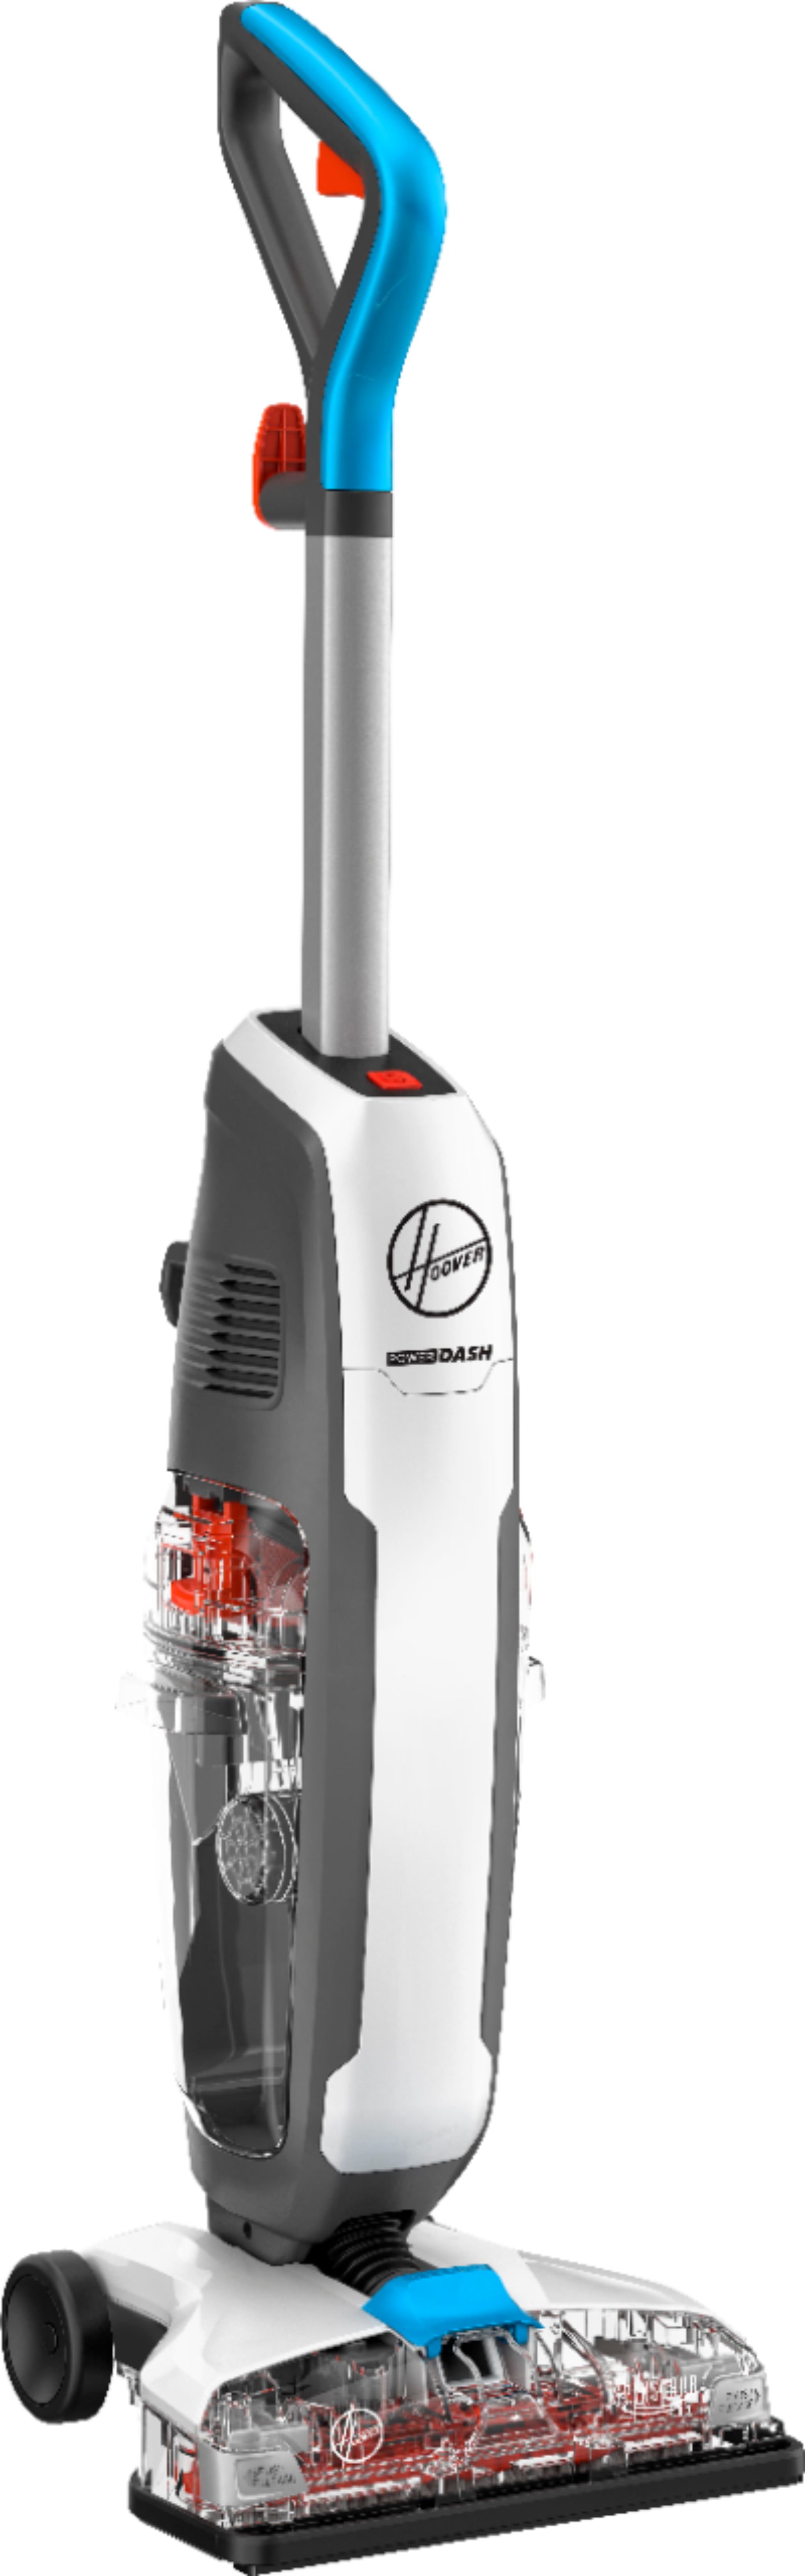 Angle View: BISSELL CrossWave All-in-One Multi-Surface Wet Dry Upright Vacuum - Molded White, Titanium and Cha Cha Lime Green